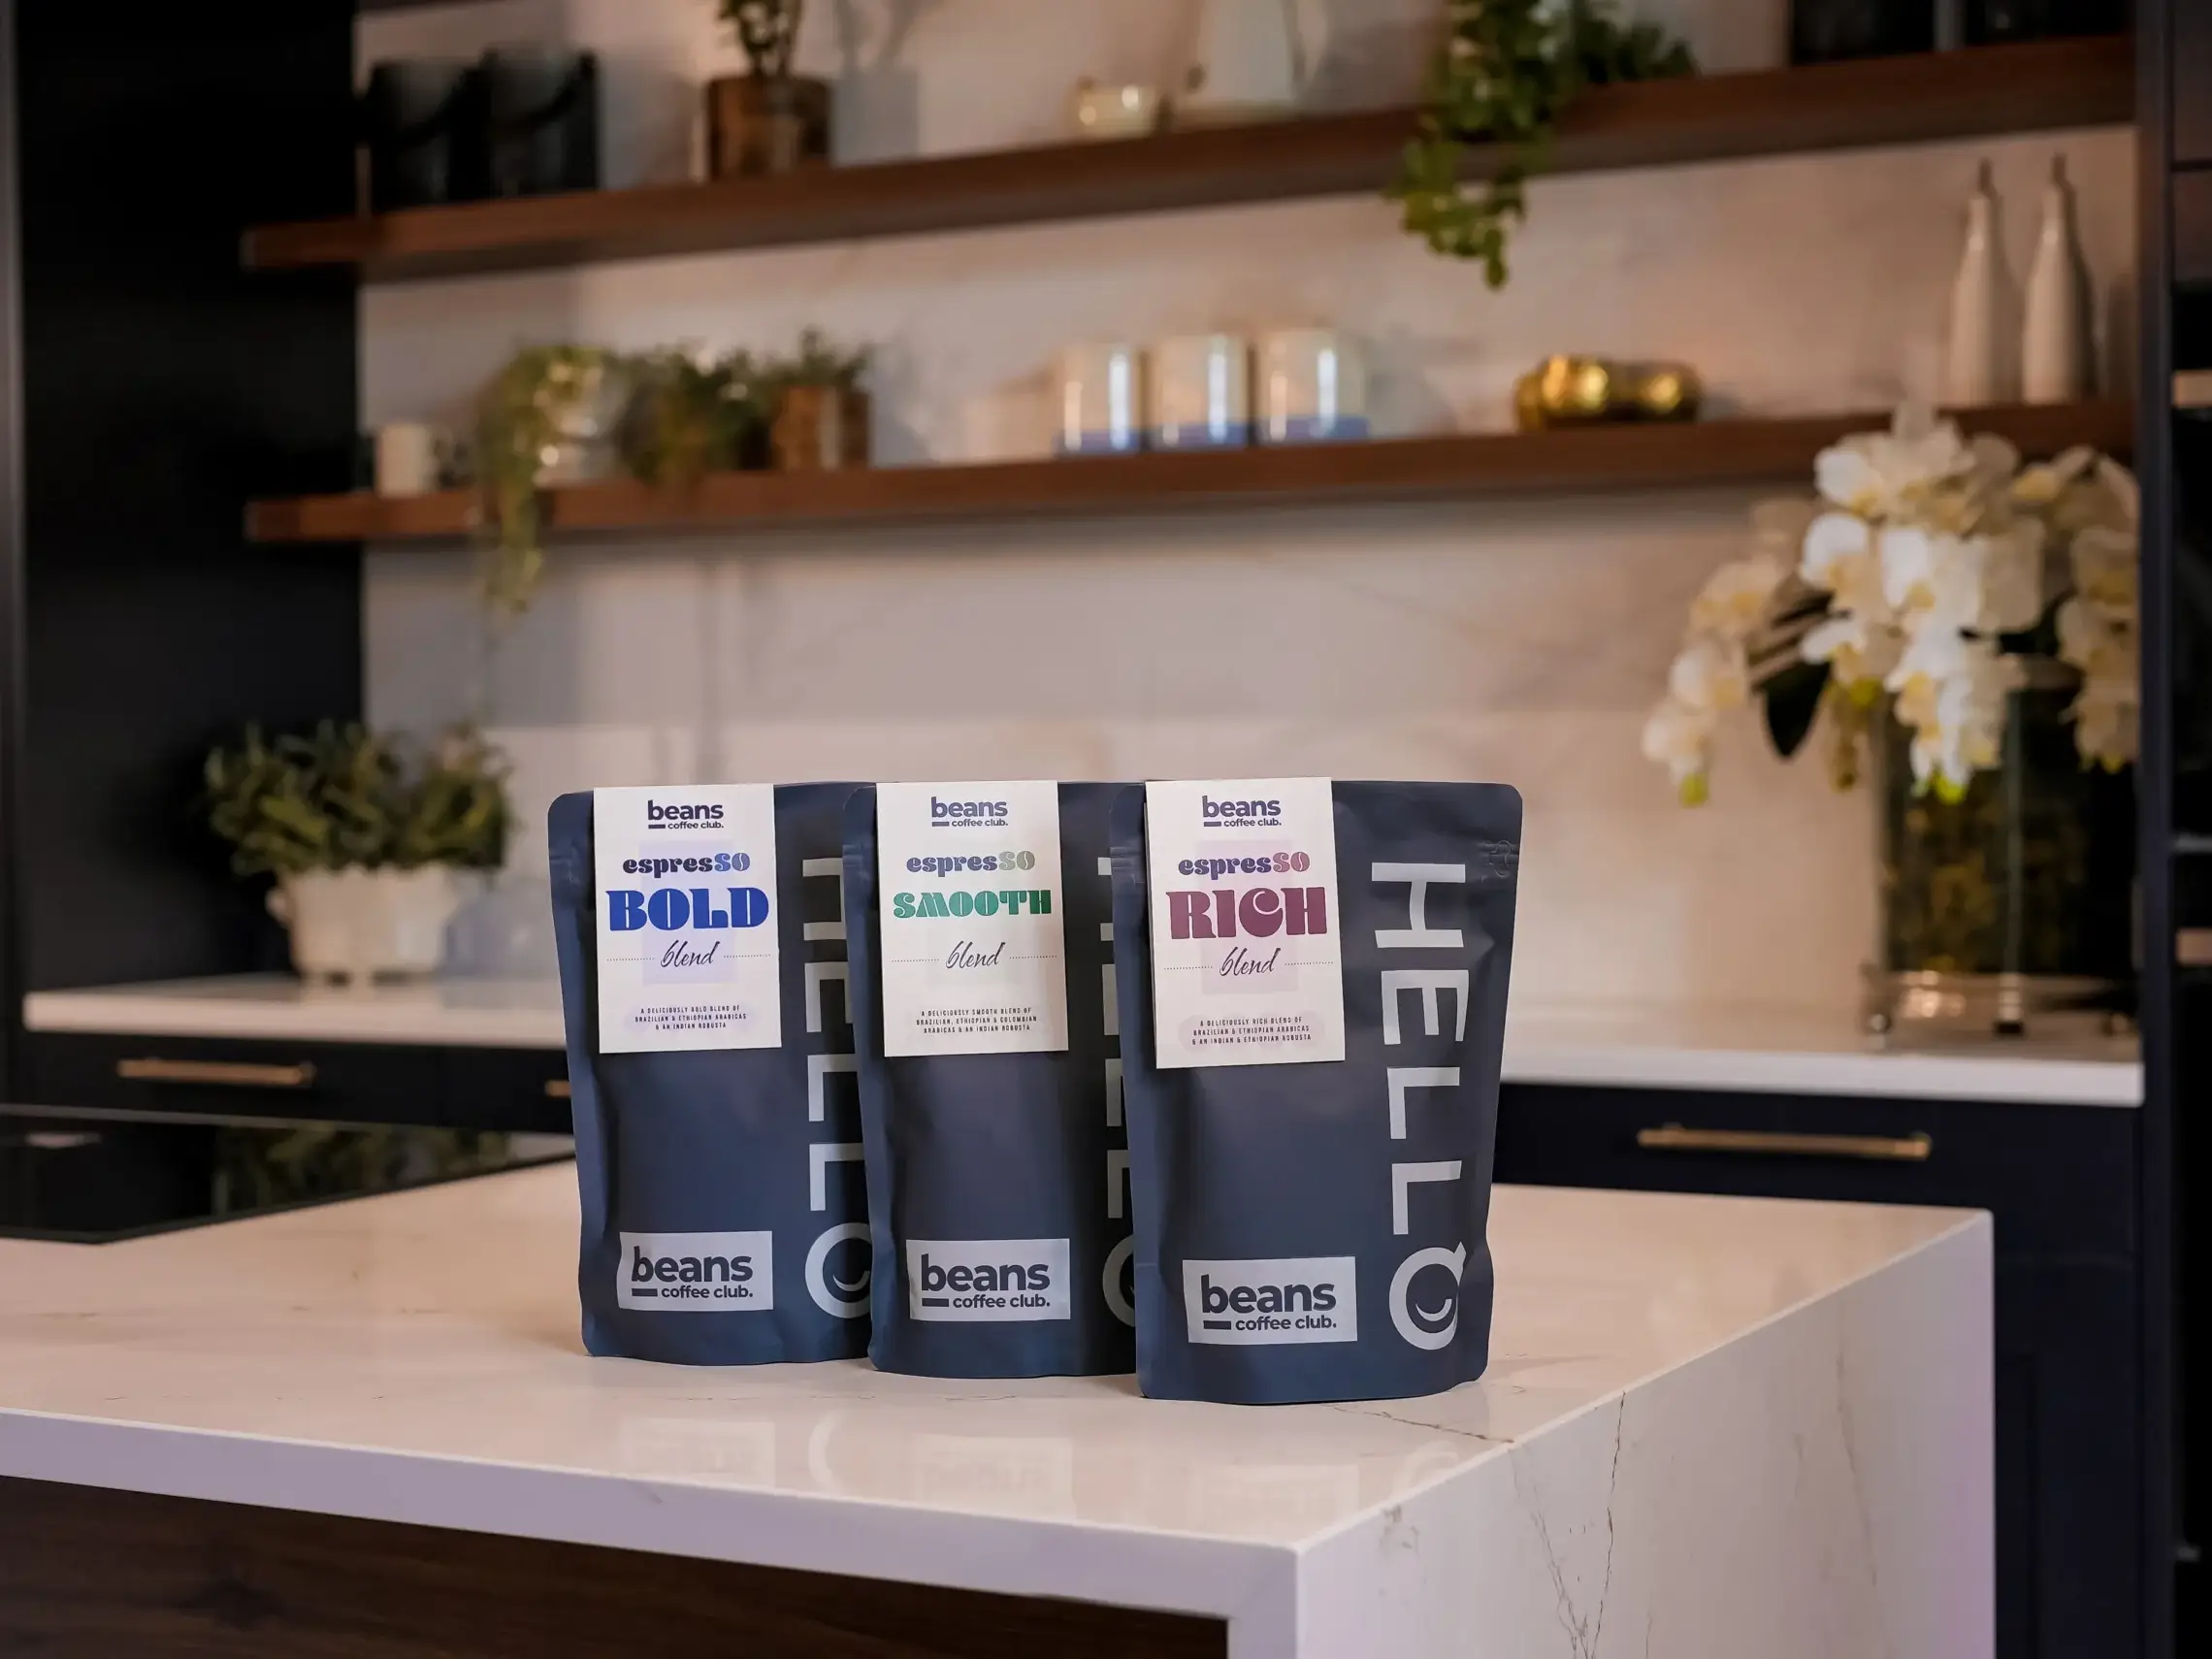 Coffee packs in kitchen